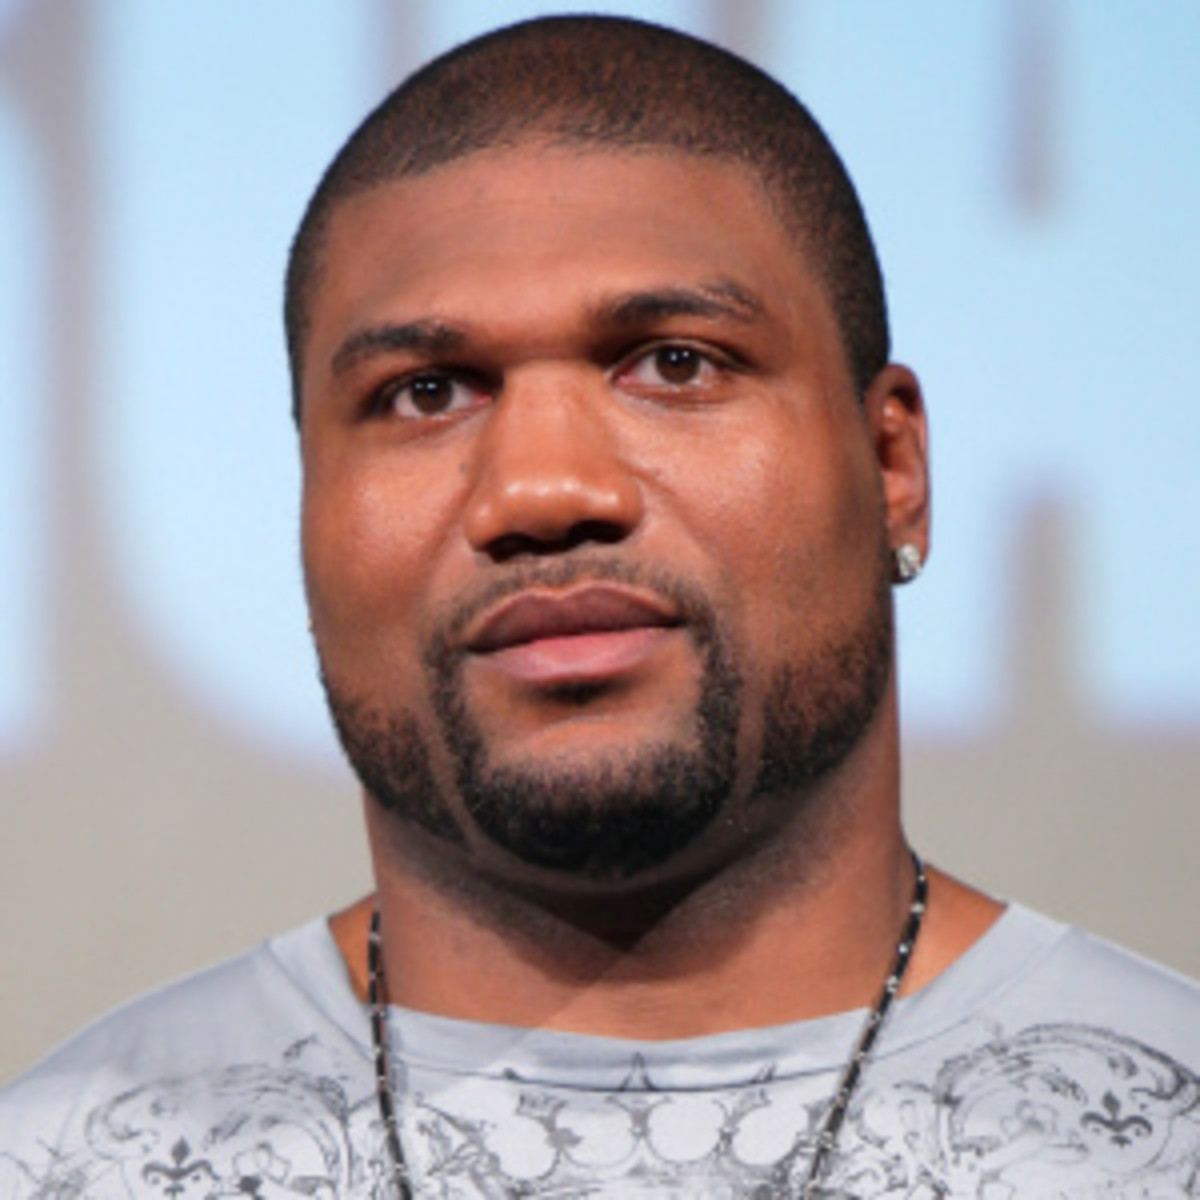 Advocacy groups want Quinton "Rampage" Jackson removed from his upcoming UFC fight. (Kiyoshi Ota/Getty Images)